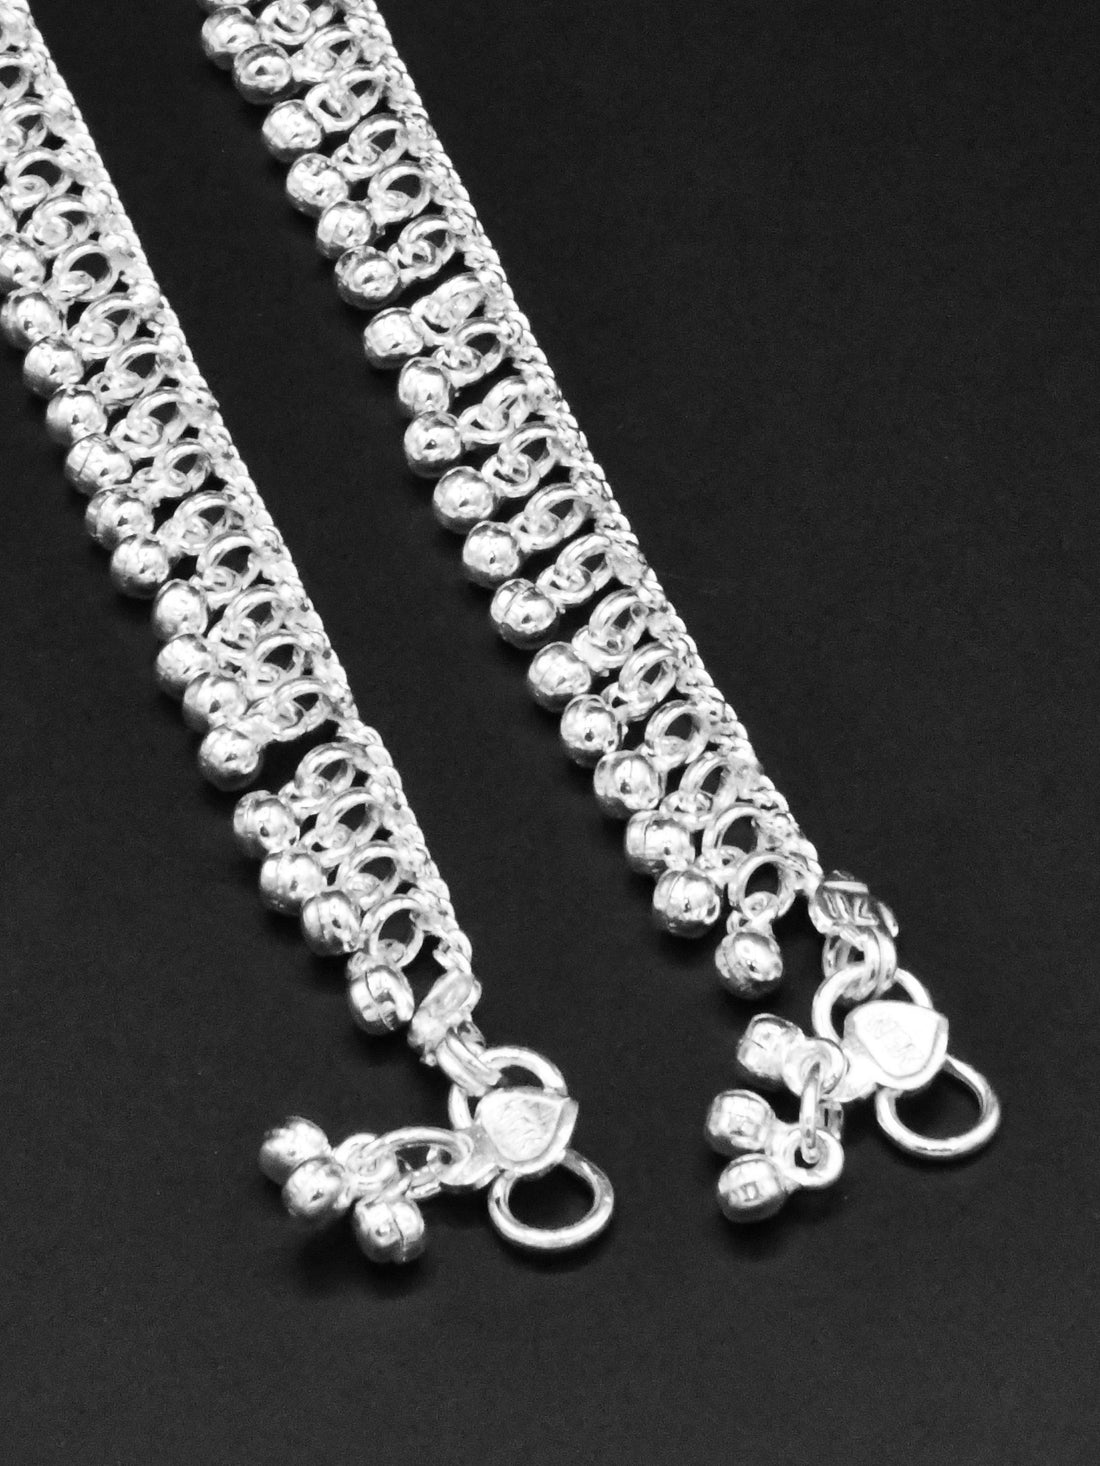 Baby Silver Anklets - Roop Darshan